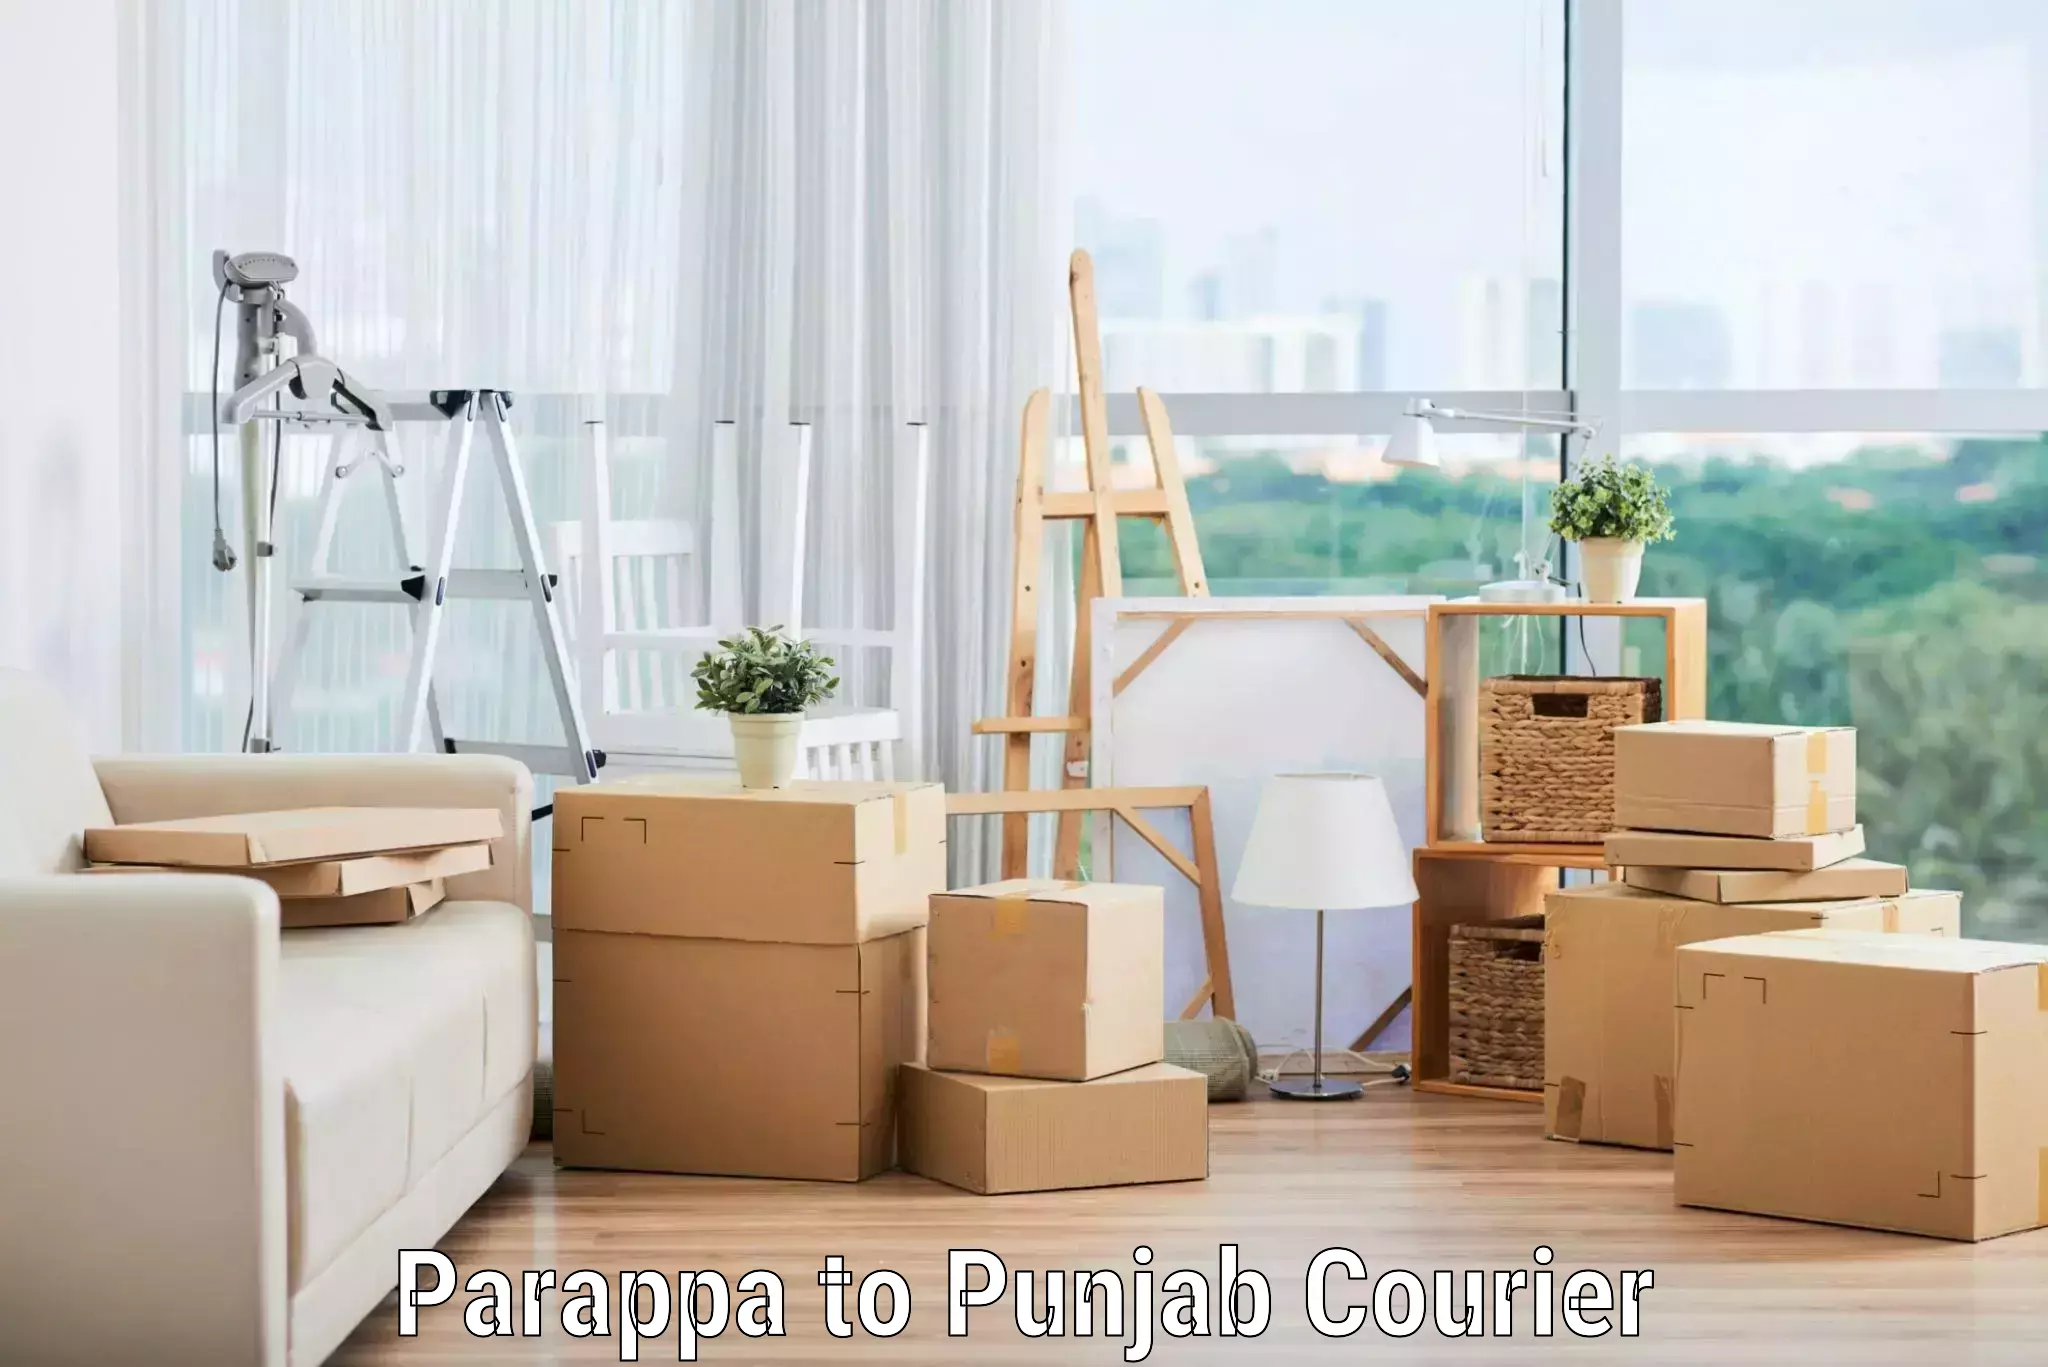 Full home relocation services in Parappa to Central University of Punjab Bathinda